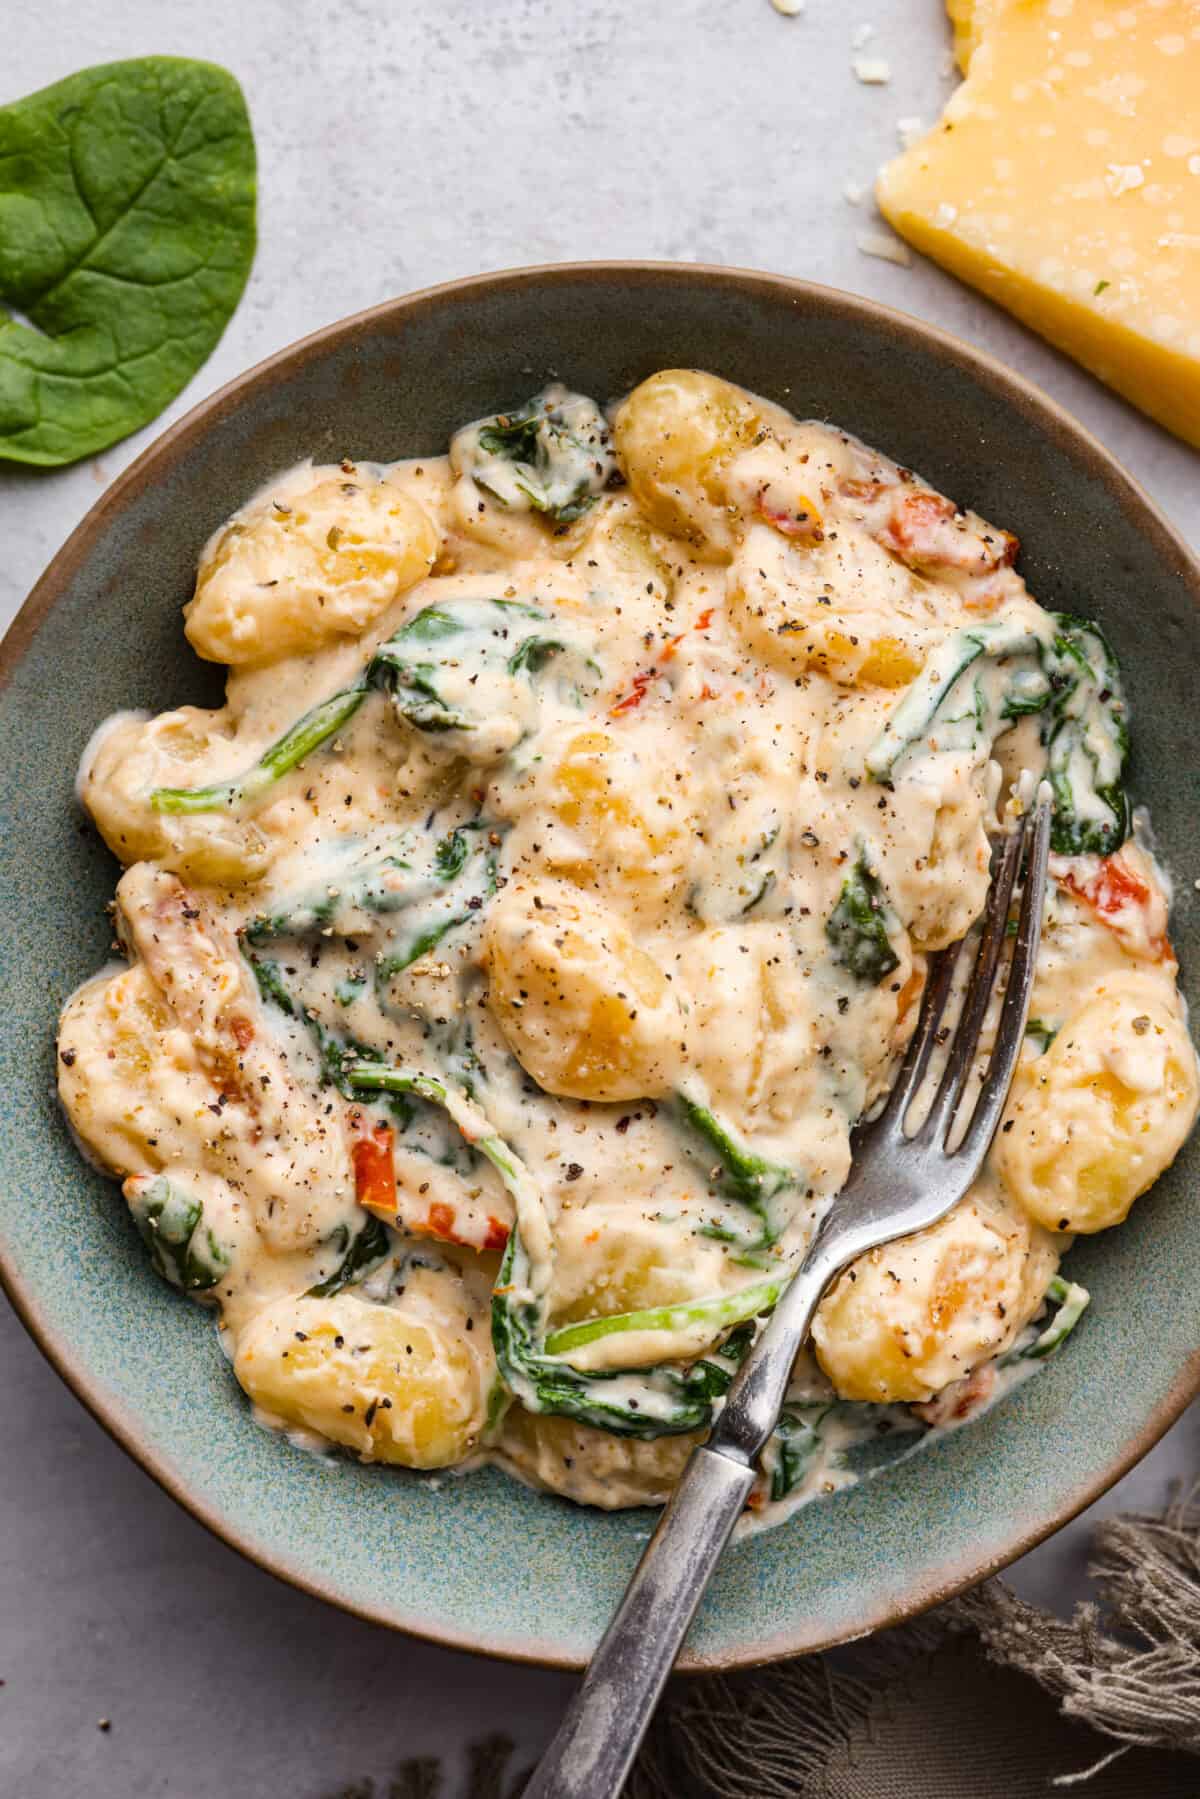 A serving of Tuscan parmesan gnocchi in a gray bowl.